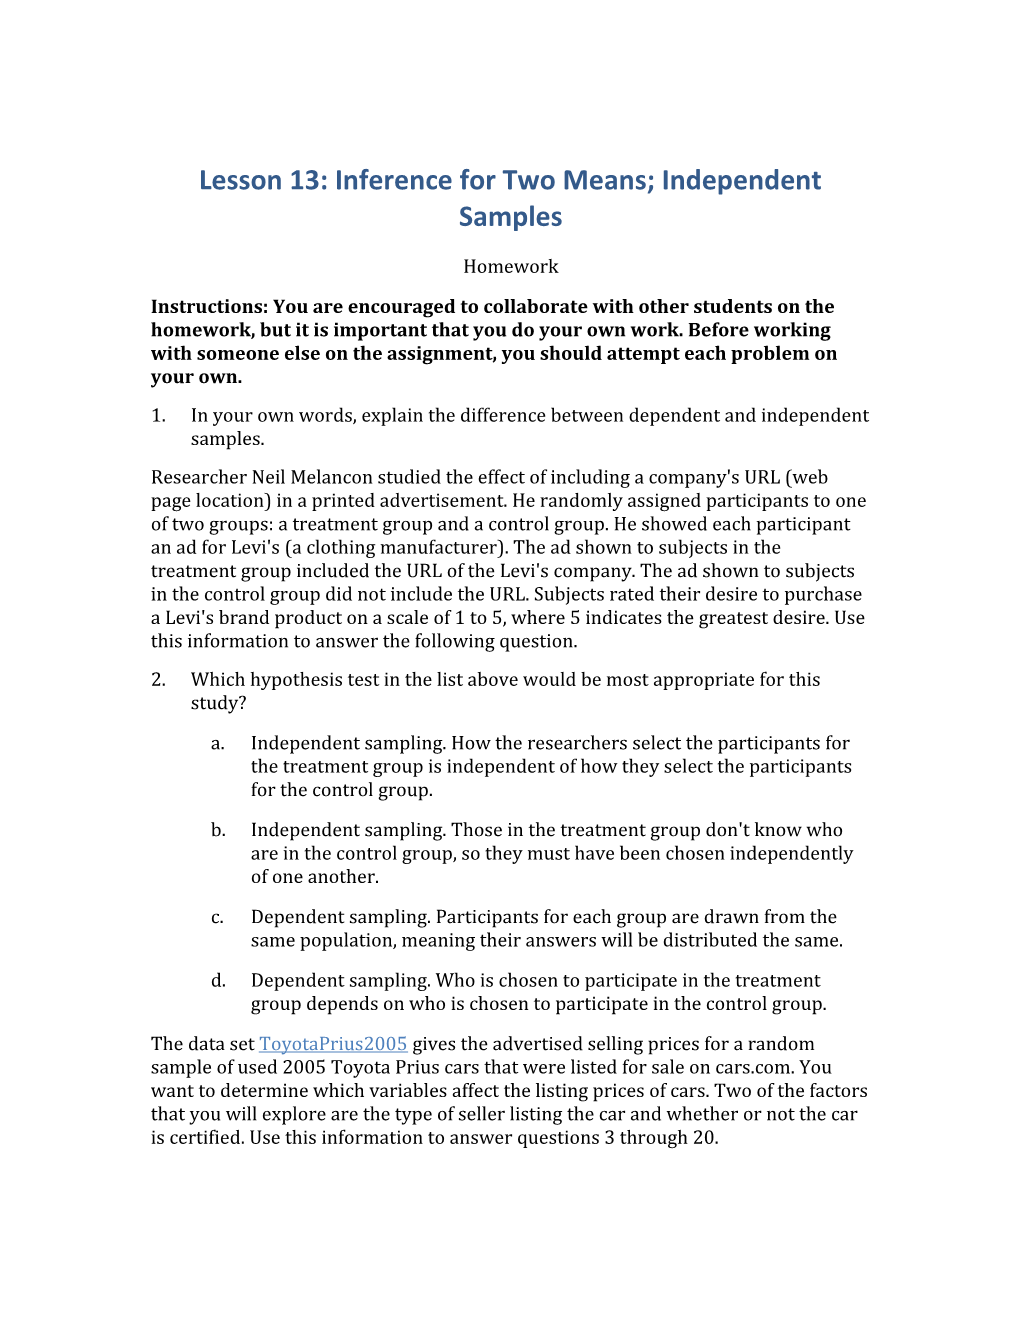 Lesson 13: Inference for Two Means; Independent Samples